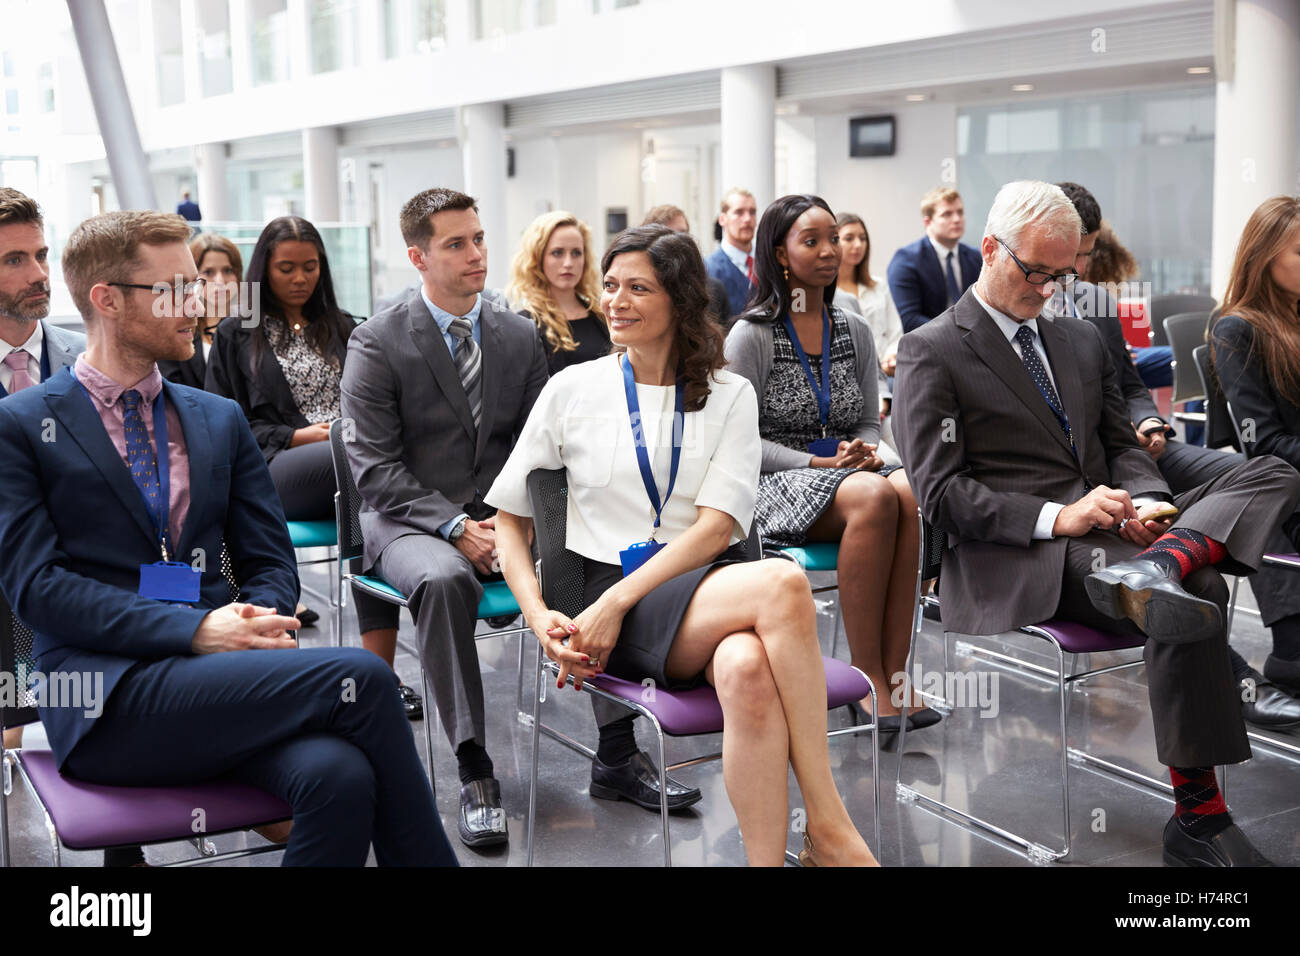 Audience Waiting For Speaker At Conference Presentation Stock Photo